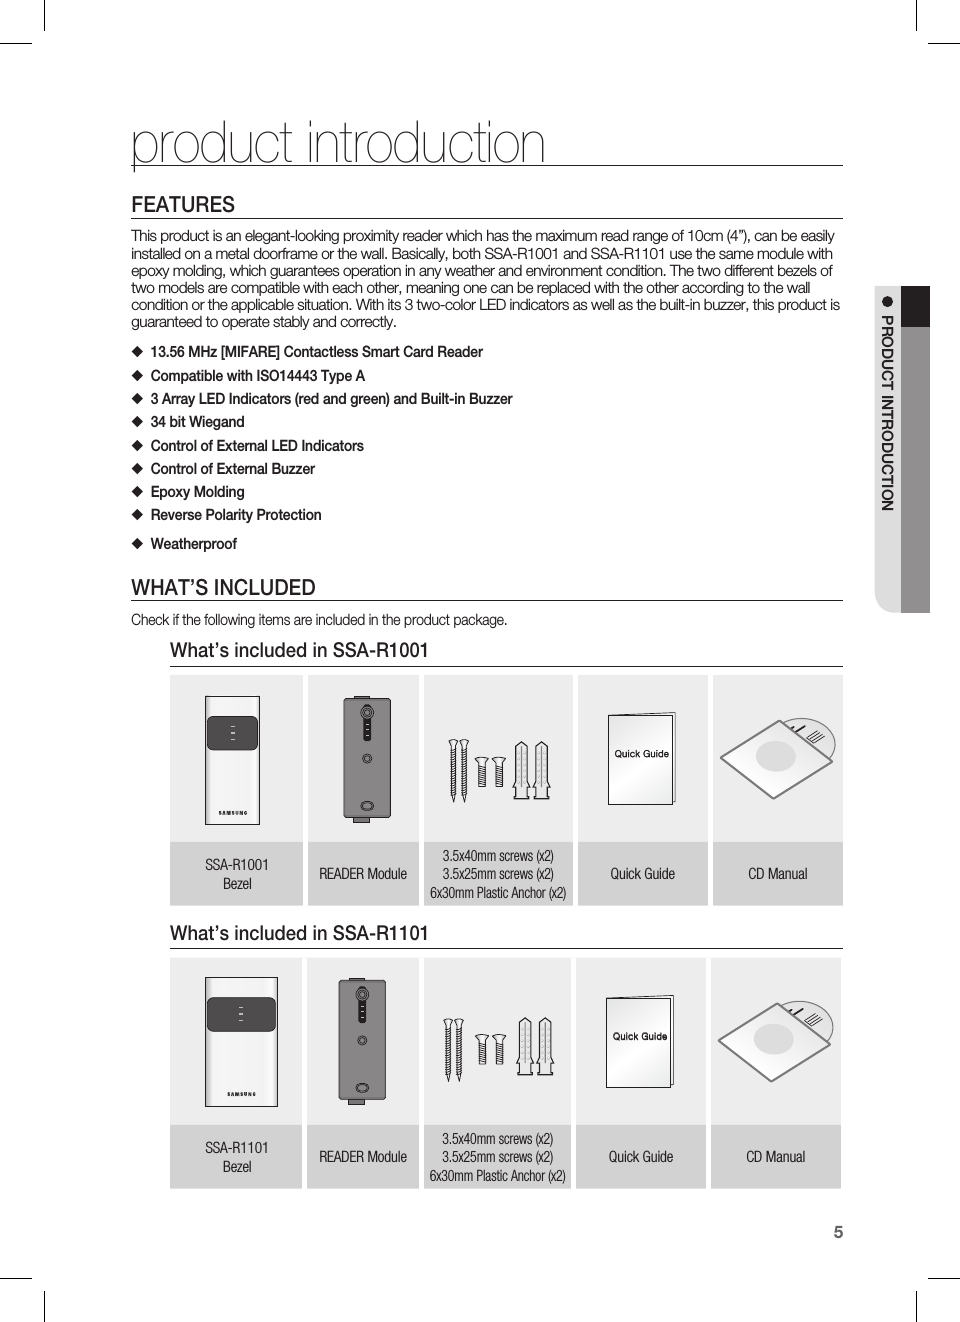 English5PRODUCT INTRODUCTIONFEATURESThis product is an elegant-looking proximity reader which has the maximum read range of 10cm (4”), can be easily installed on a metal doorframe or the wall. Basically, both SSA-R1001 and SSA-R1101 use the same module with epoxy molding, which guarantees operation in any weather and environment condition. The two different bezels of two models are compatible with each other, meaning one can be replaced with the other according to the wall condition or the applicable situation. With its 3 two-color LED indicators as well as the built-in buzzer, this product is guaranteed to operate stably and correctly.13.56 MHz [MIFARE] Contactless Smart Card ReaderCompatible with ISO14443 Type A 3 Array LED Indicators (red and green) and Built-in Buzzer34 bit Wiegand Control of External LED IndicatorsControl of External BuzzerEpoxy MoldingReverse Polarity ProtectionWeatherproofWHAT’S INCLUDEDCheck if the following items are included in the product package.What’s included in SSA-R1001xGnSSA-R1001Bezel READER Module3.5x40mm screws (x2)3.5x25mm screws (x2)6x30mm Plastic Anchor (x2)Quick Guide CD ManualWhat’s included in SSA-R1101xGnSSA-R1101Bezel READER Module3.5x40mm screws (x2)3.5x25mm screws (x2)6x30mm Plastic Anchor (x2)Quick Guide CD Manual◆◆◆◆◆◆◆◆◆product introduction